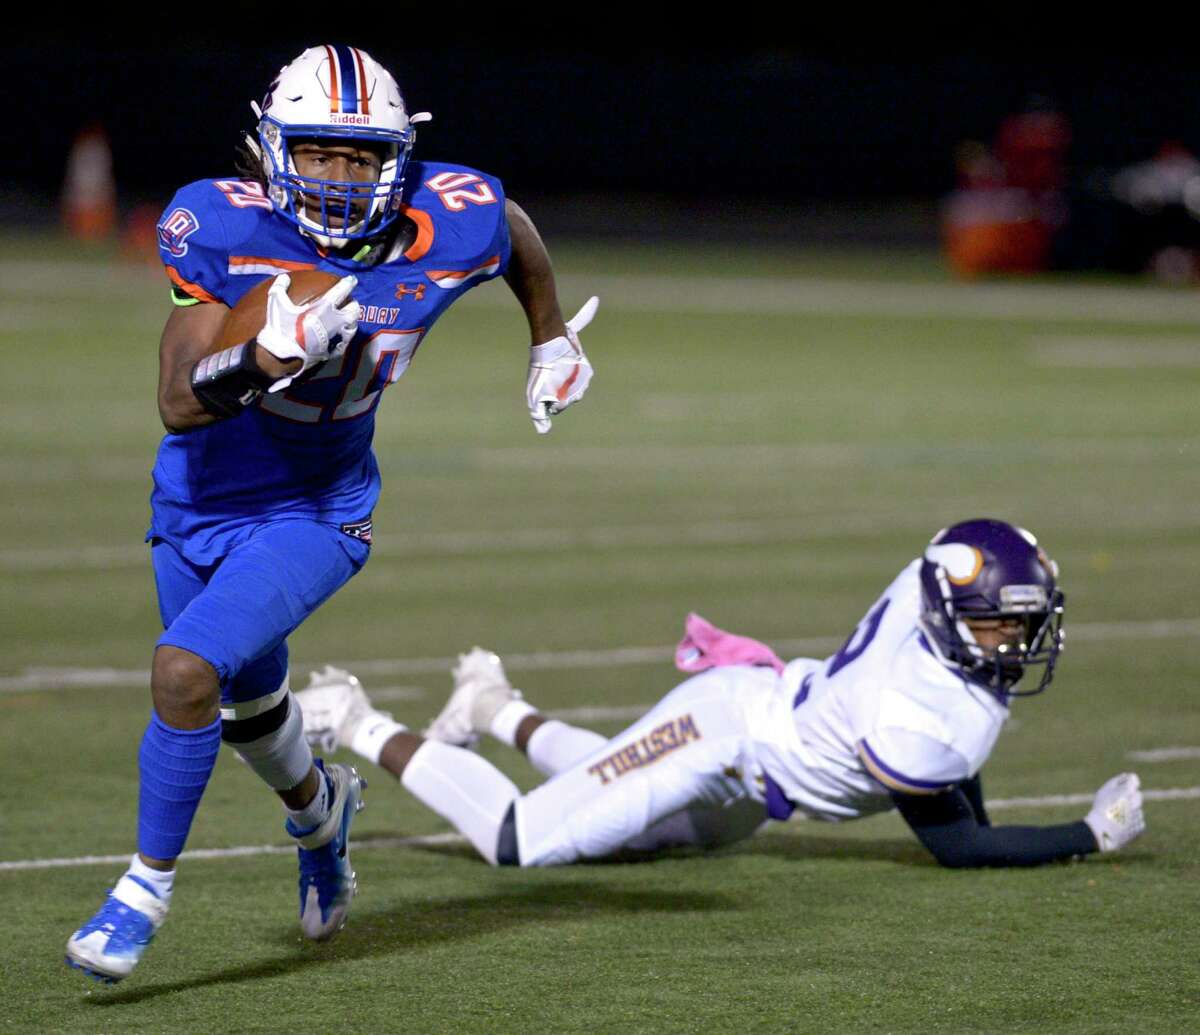 Danbury’s Artez Taft gets away from Westhill’s Sam Edouard during Friday’s game.